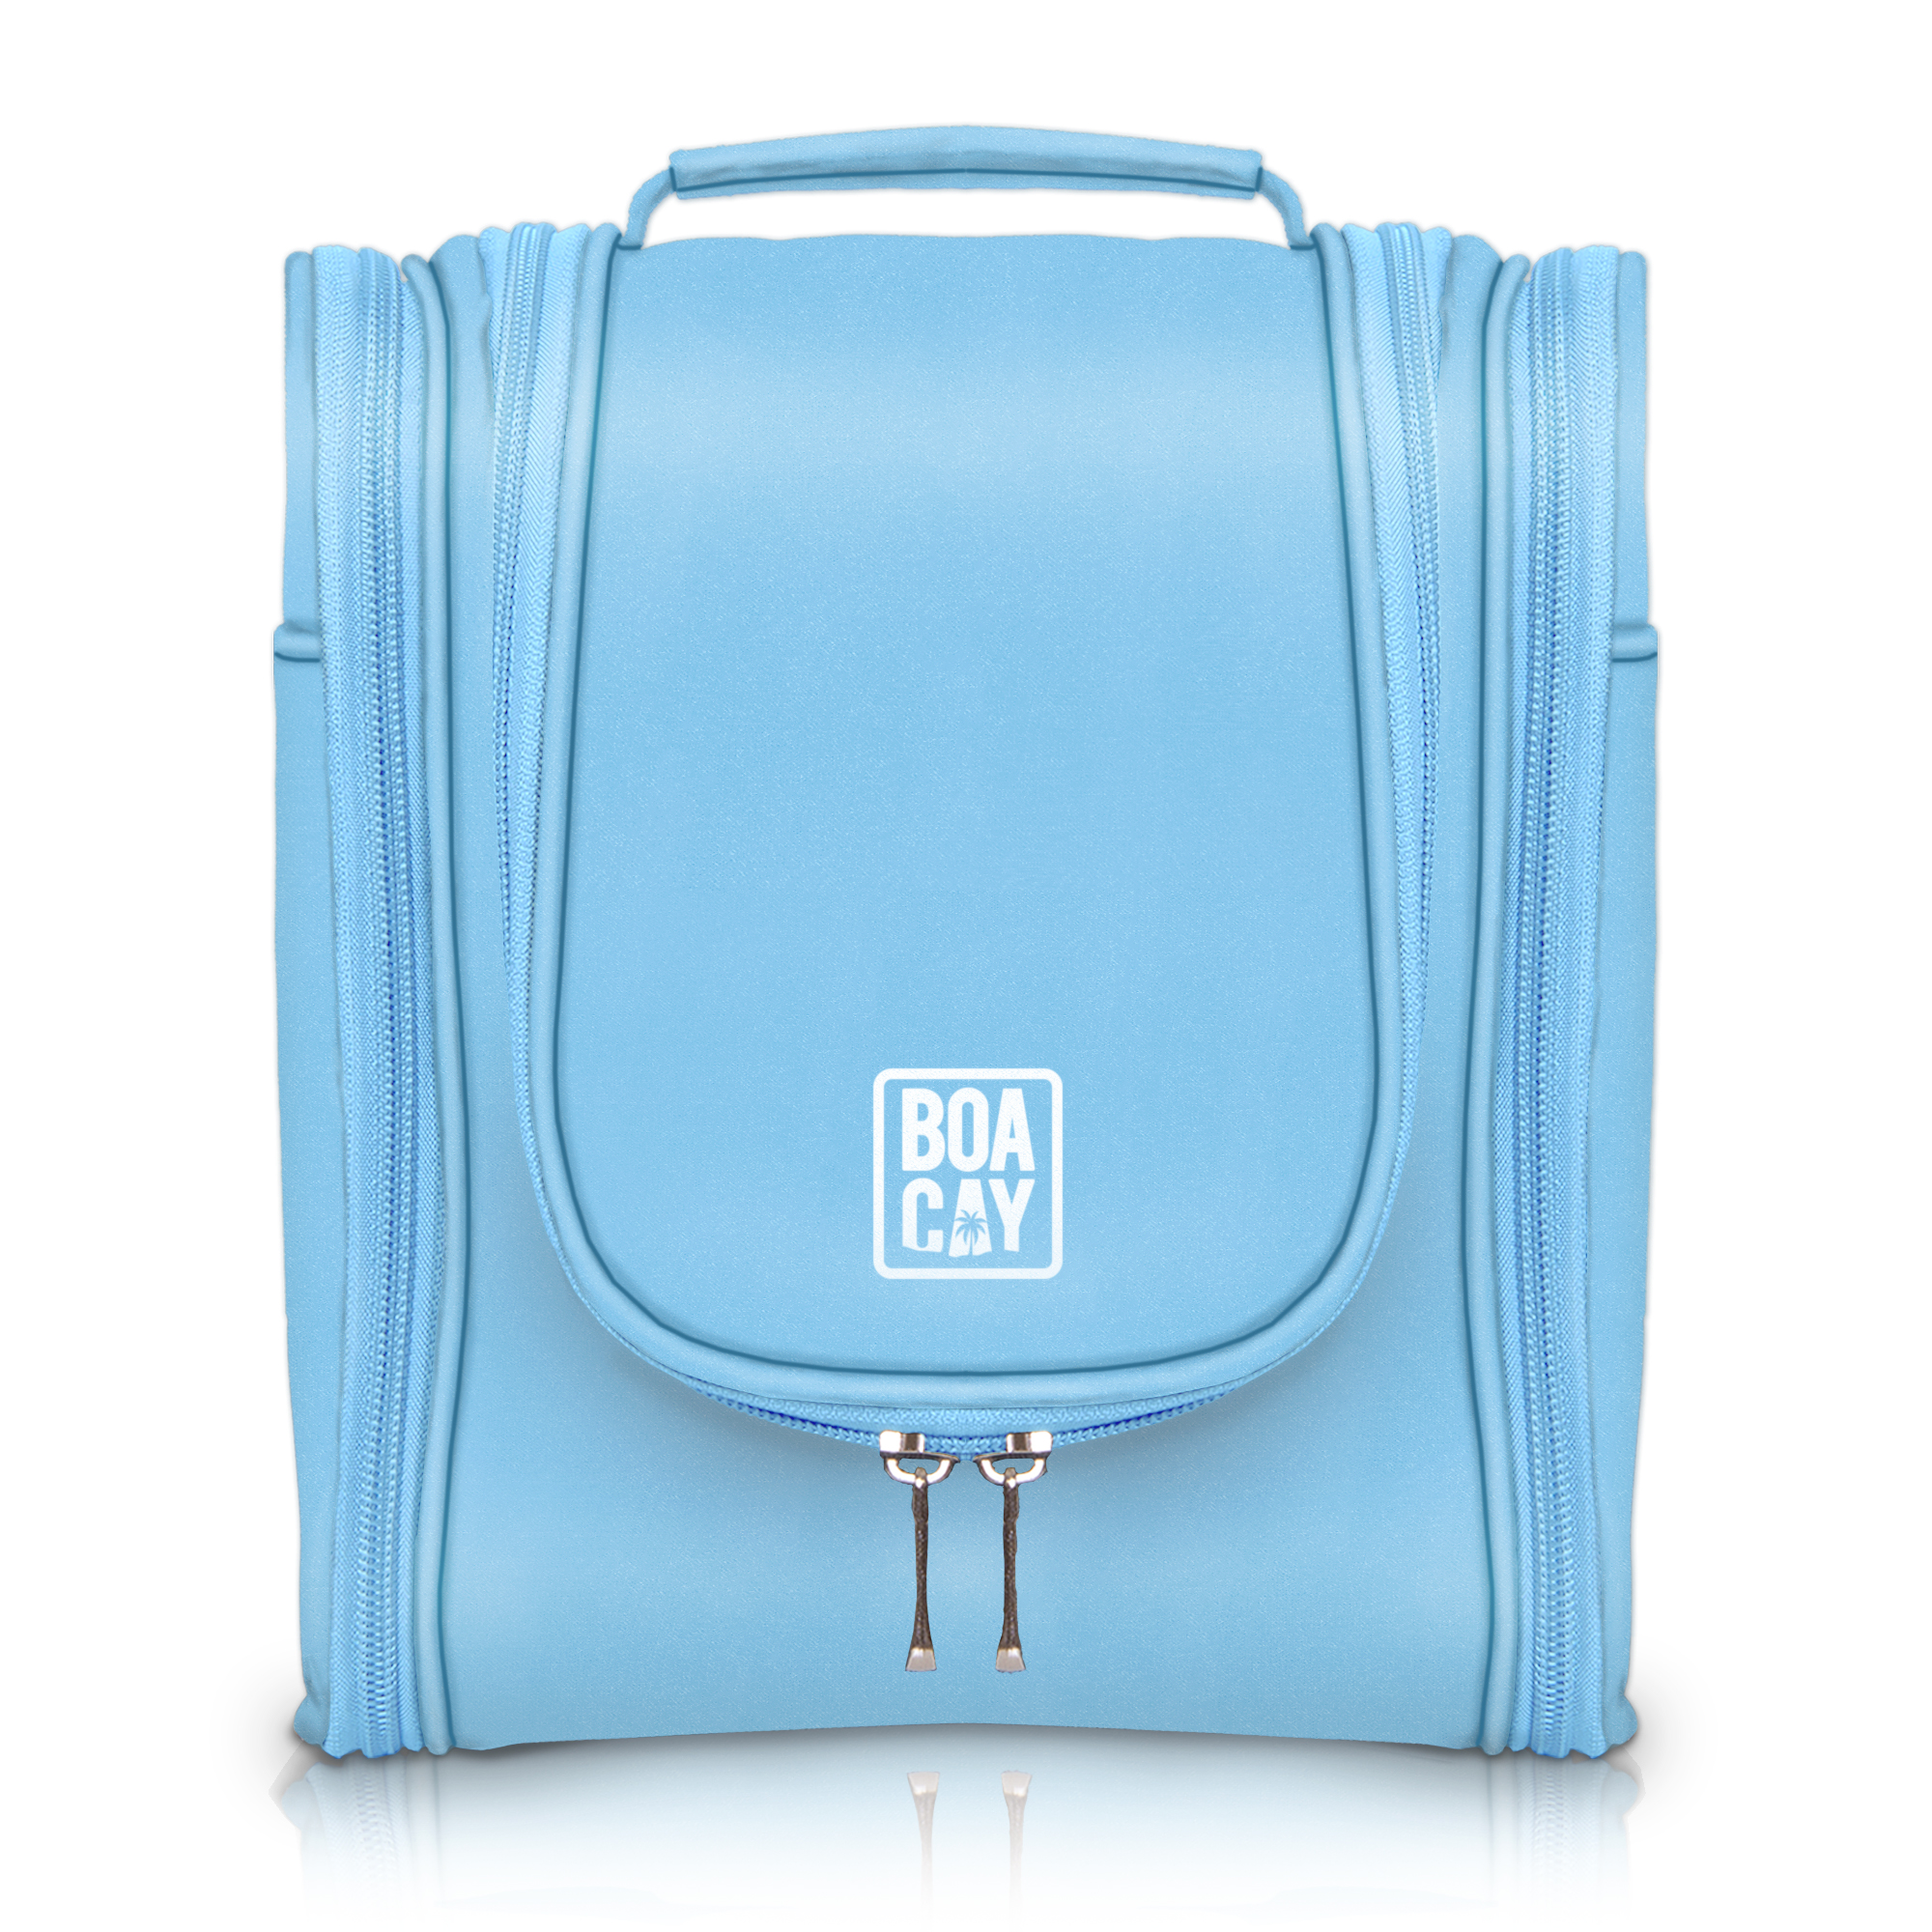 BOACAY Baby Blue Extra-Large Travel Toiletry Bag for Women and Men